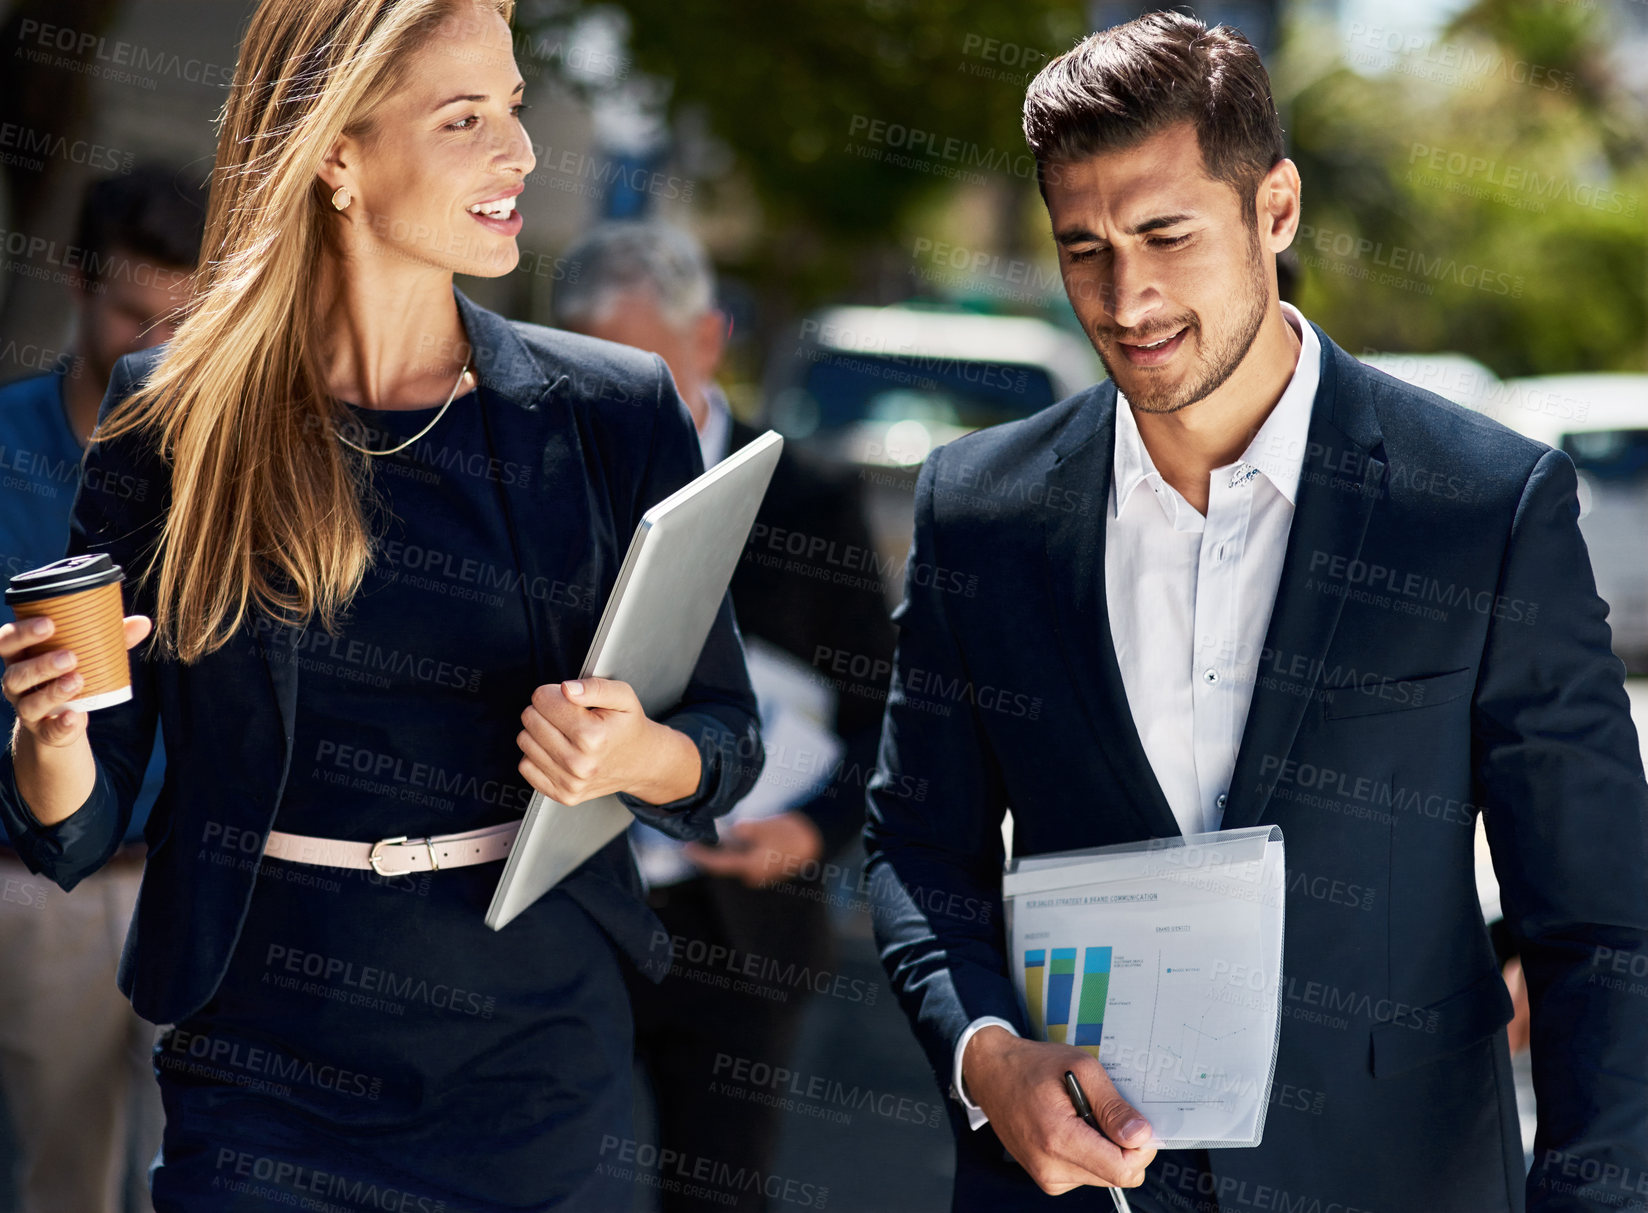 Buy stock photo Cropped shot of two corporate colleagues having a discussion while walking down the street on their way to work